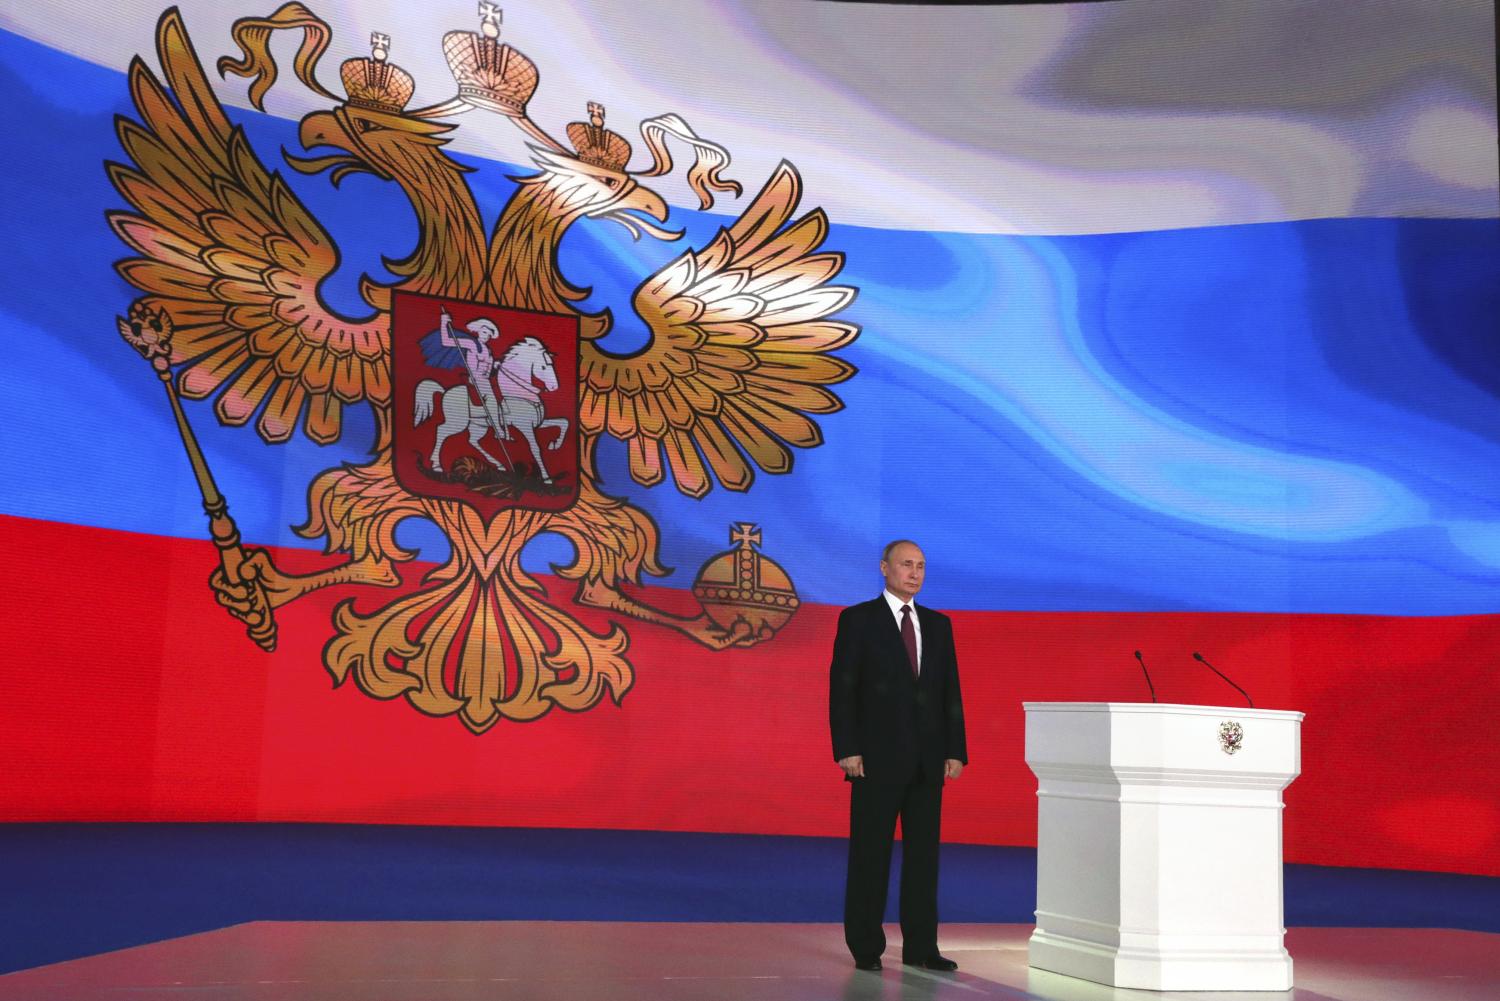 Russian President Vladimir Putin stands on the stage as he addresses the Federal Assembly, including the State Duma parliamentarians, members of the Federation Council, regional governors and other high-ranking officials, in Moscow, Russia March 1, 2018. Sputnik/Mikhail Klimentyev/Kremlin via REUTERS ATTENTION EDITORS - THIS IMAGE WAS PROVIDED BY A THIRD PARTY. - UP1EE310W85R3